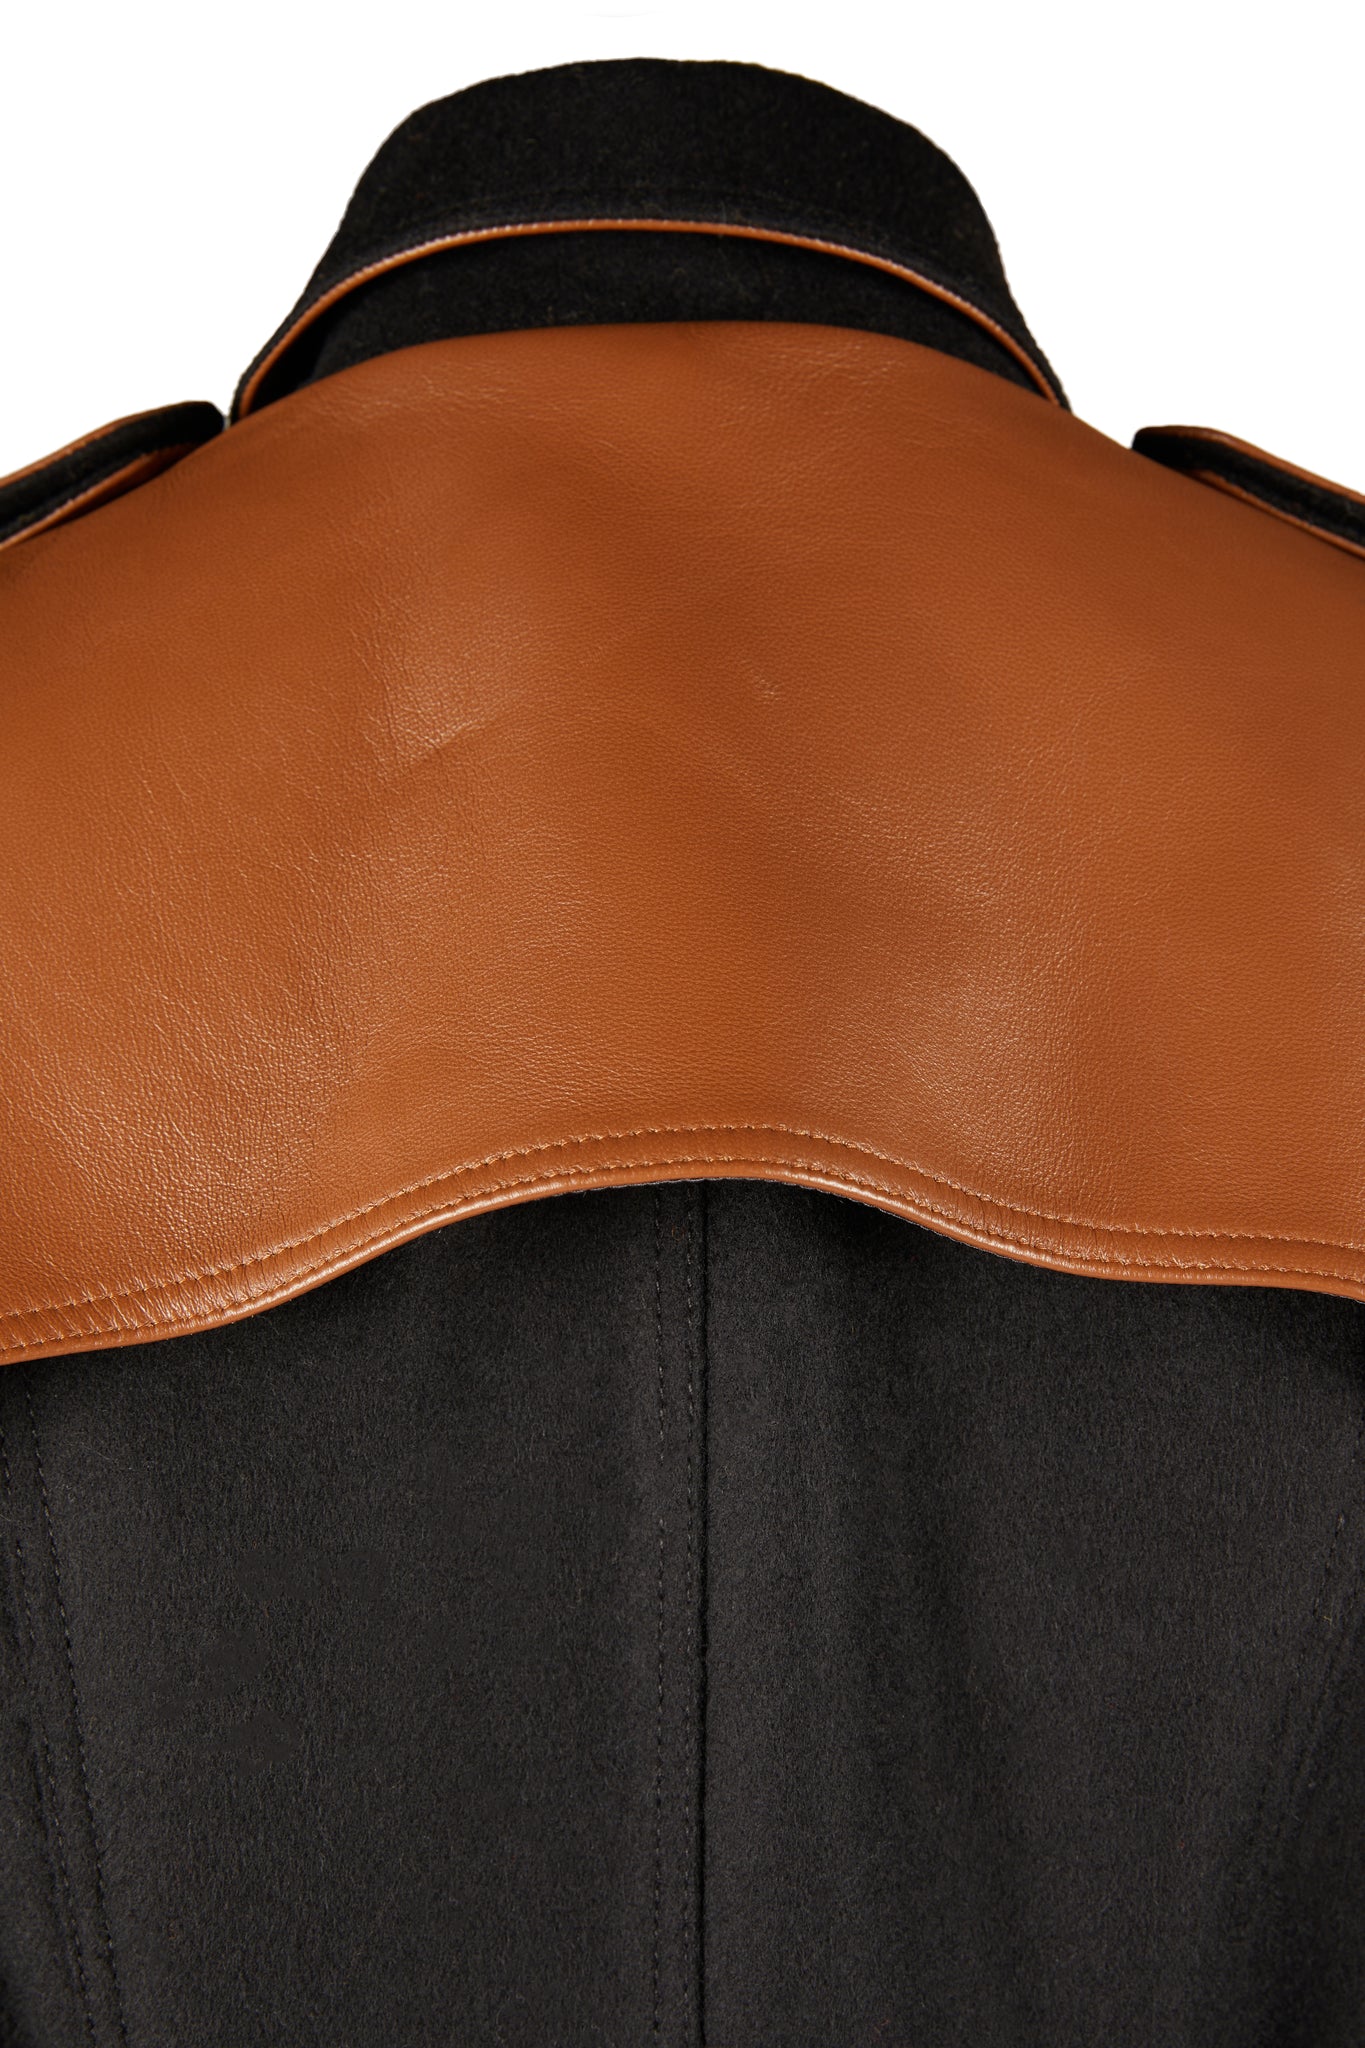 Back detail Womens black and tan brown leather detailed with gold hardware knee length wool trench coat